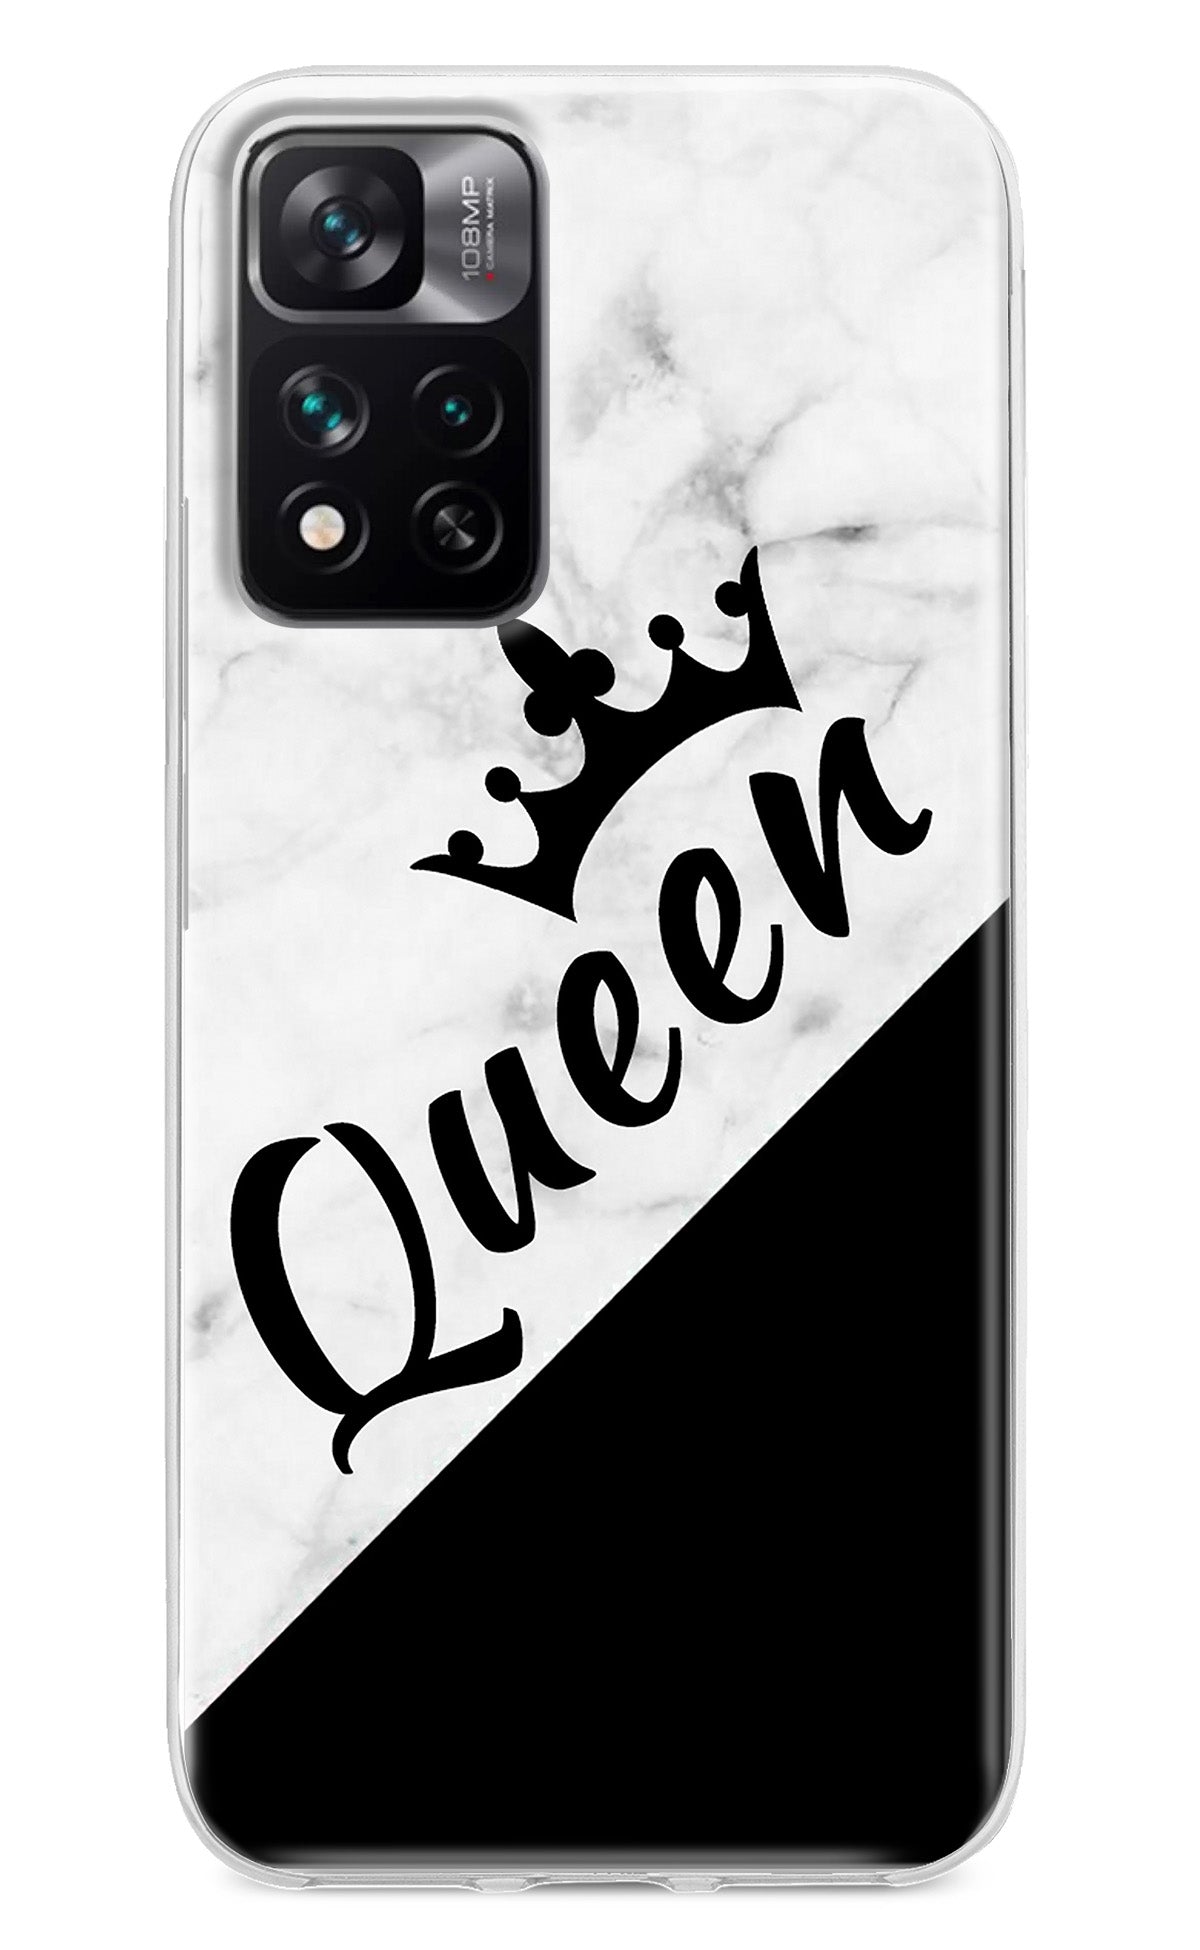 Queen Mi 11i 5G/11i 5G Hypercharge Back Cover